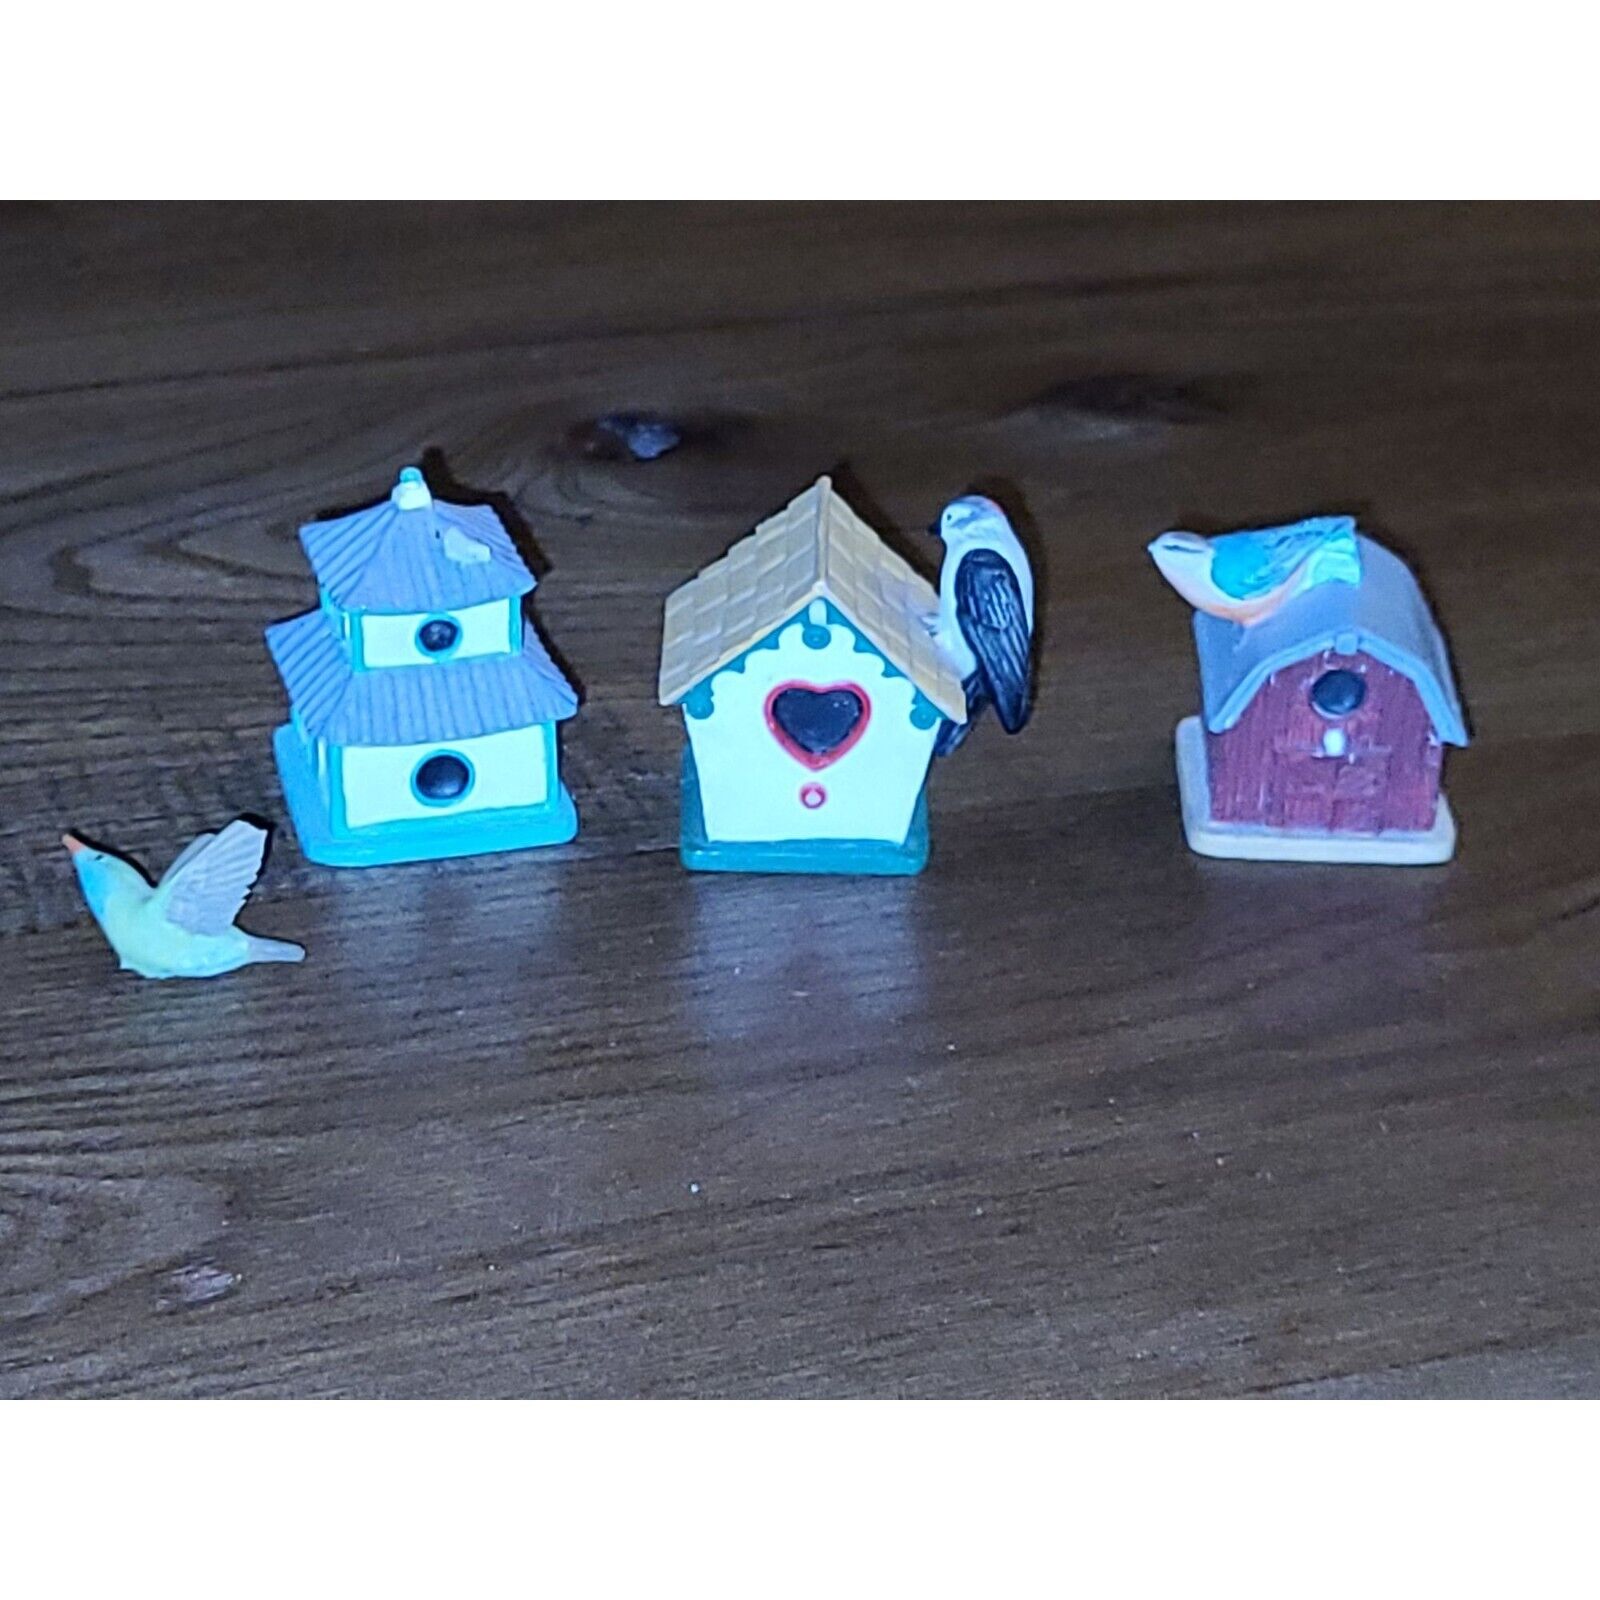 Lot of 3 Vintage Lenox Miniature Bird Houses Lot #7 Retired Collectible Houses